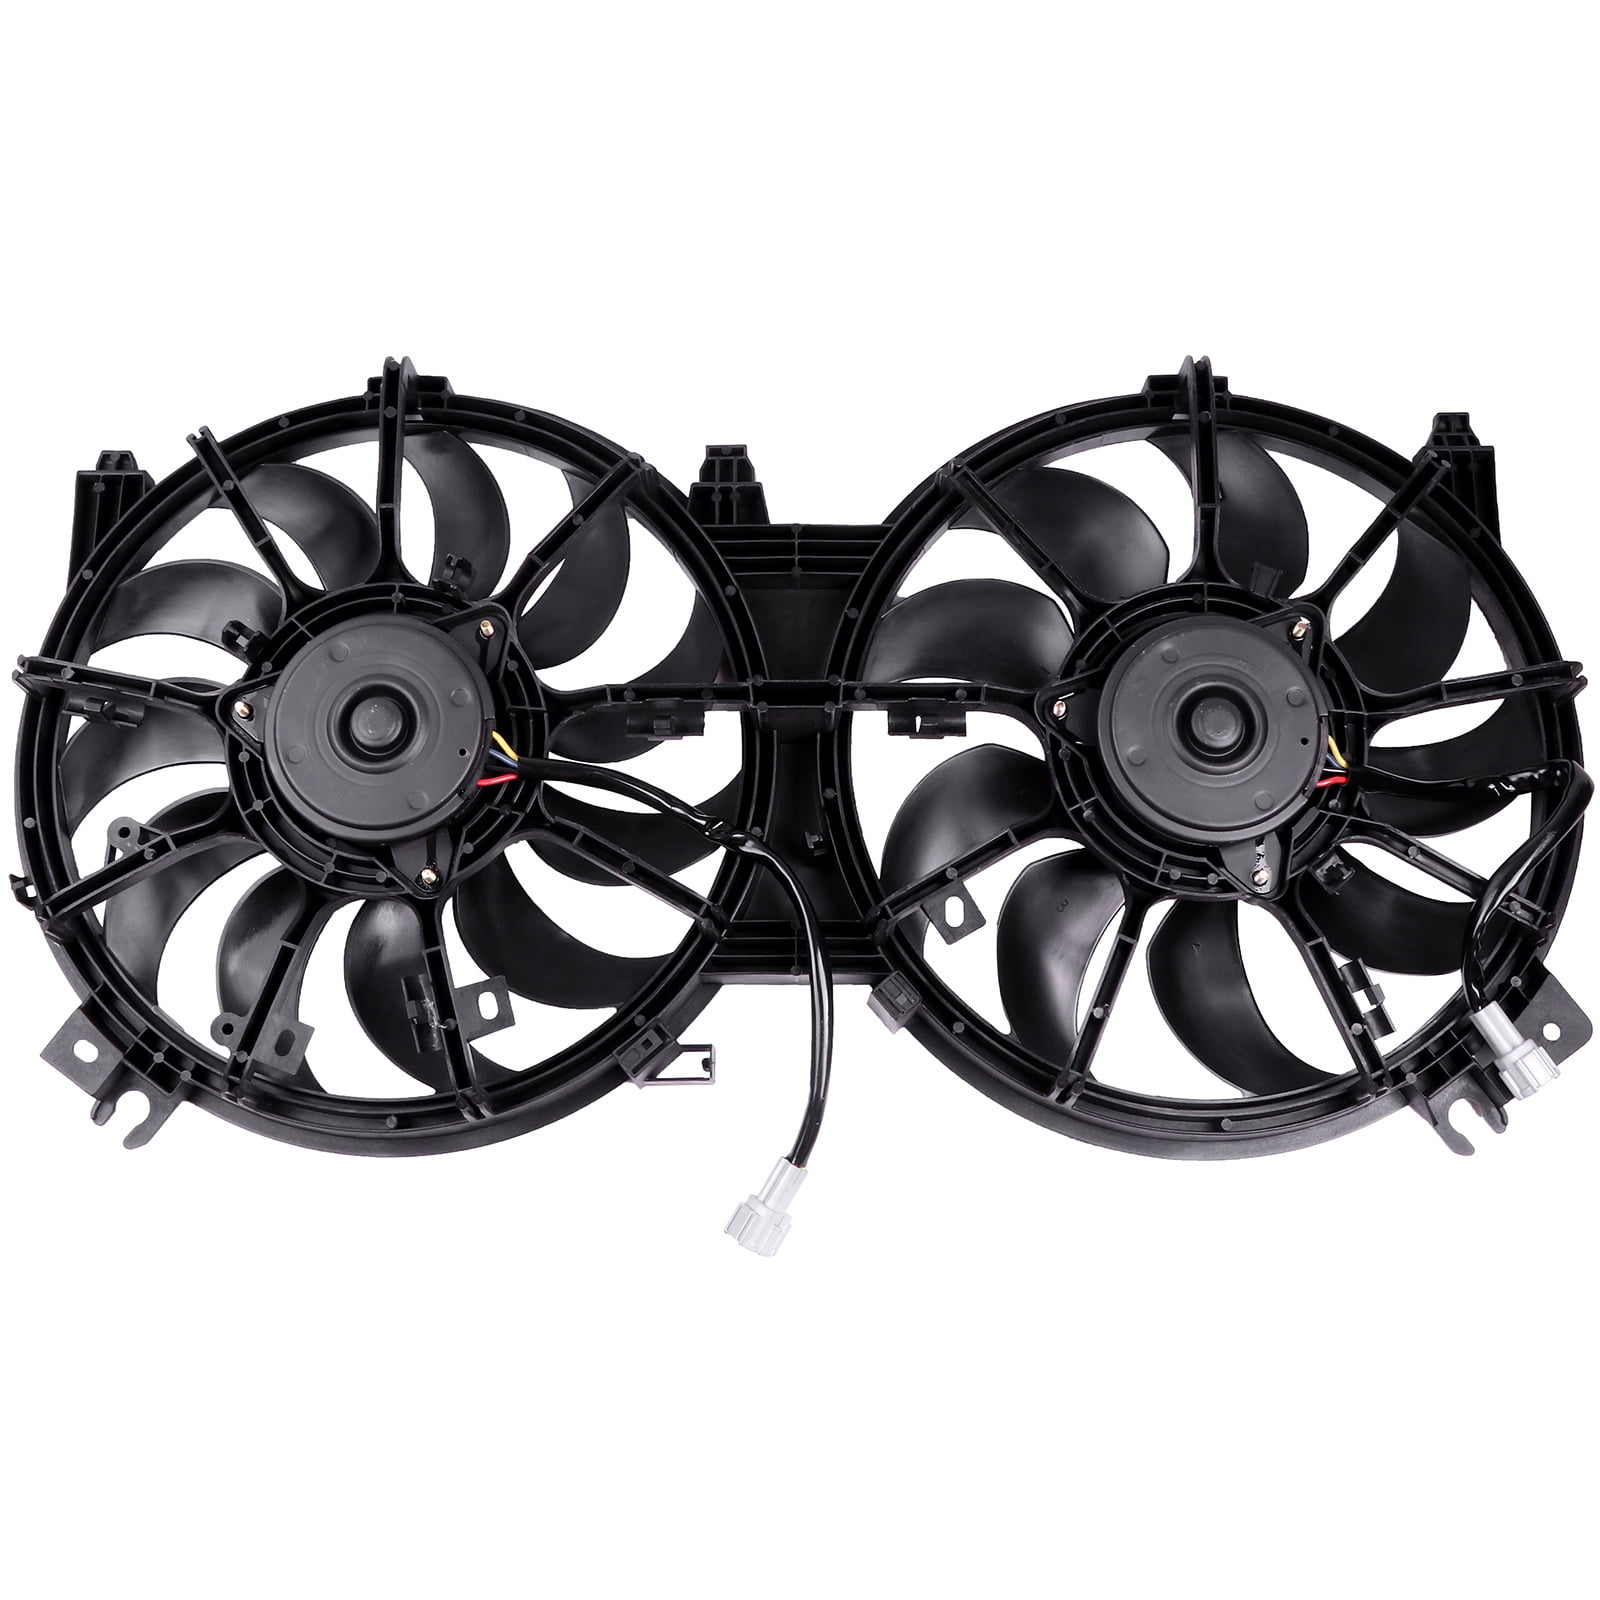 Dual Condenser Radiator Cooling Fan for Nissan Altima Maxima 